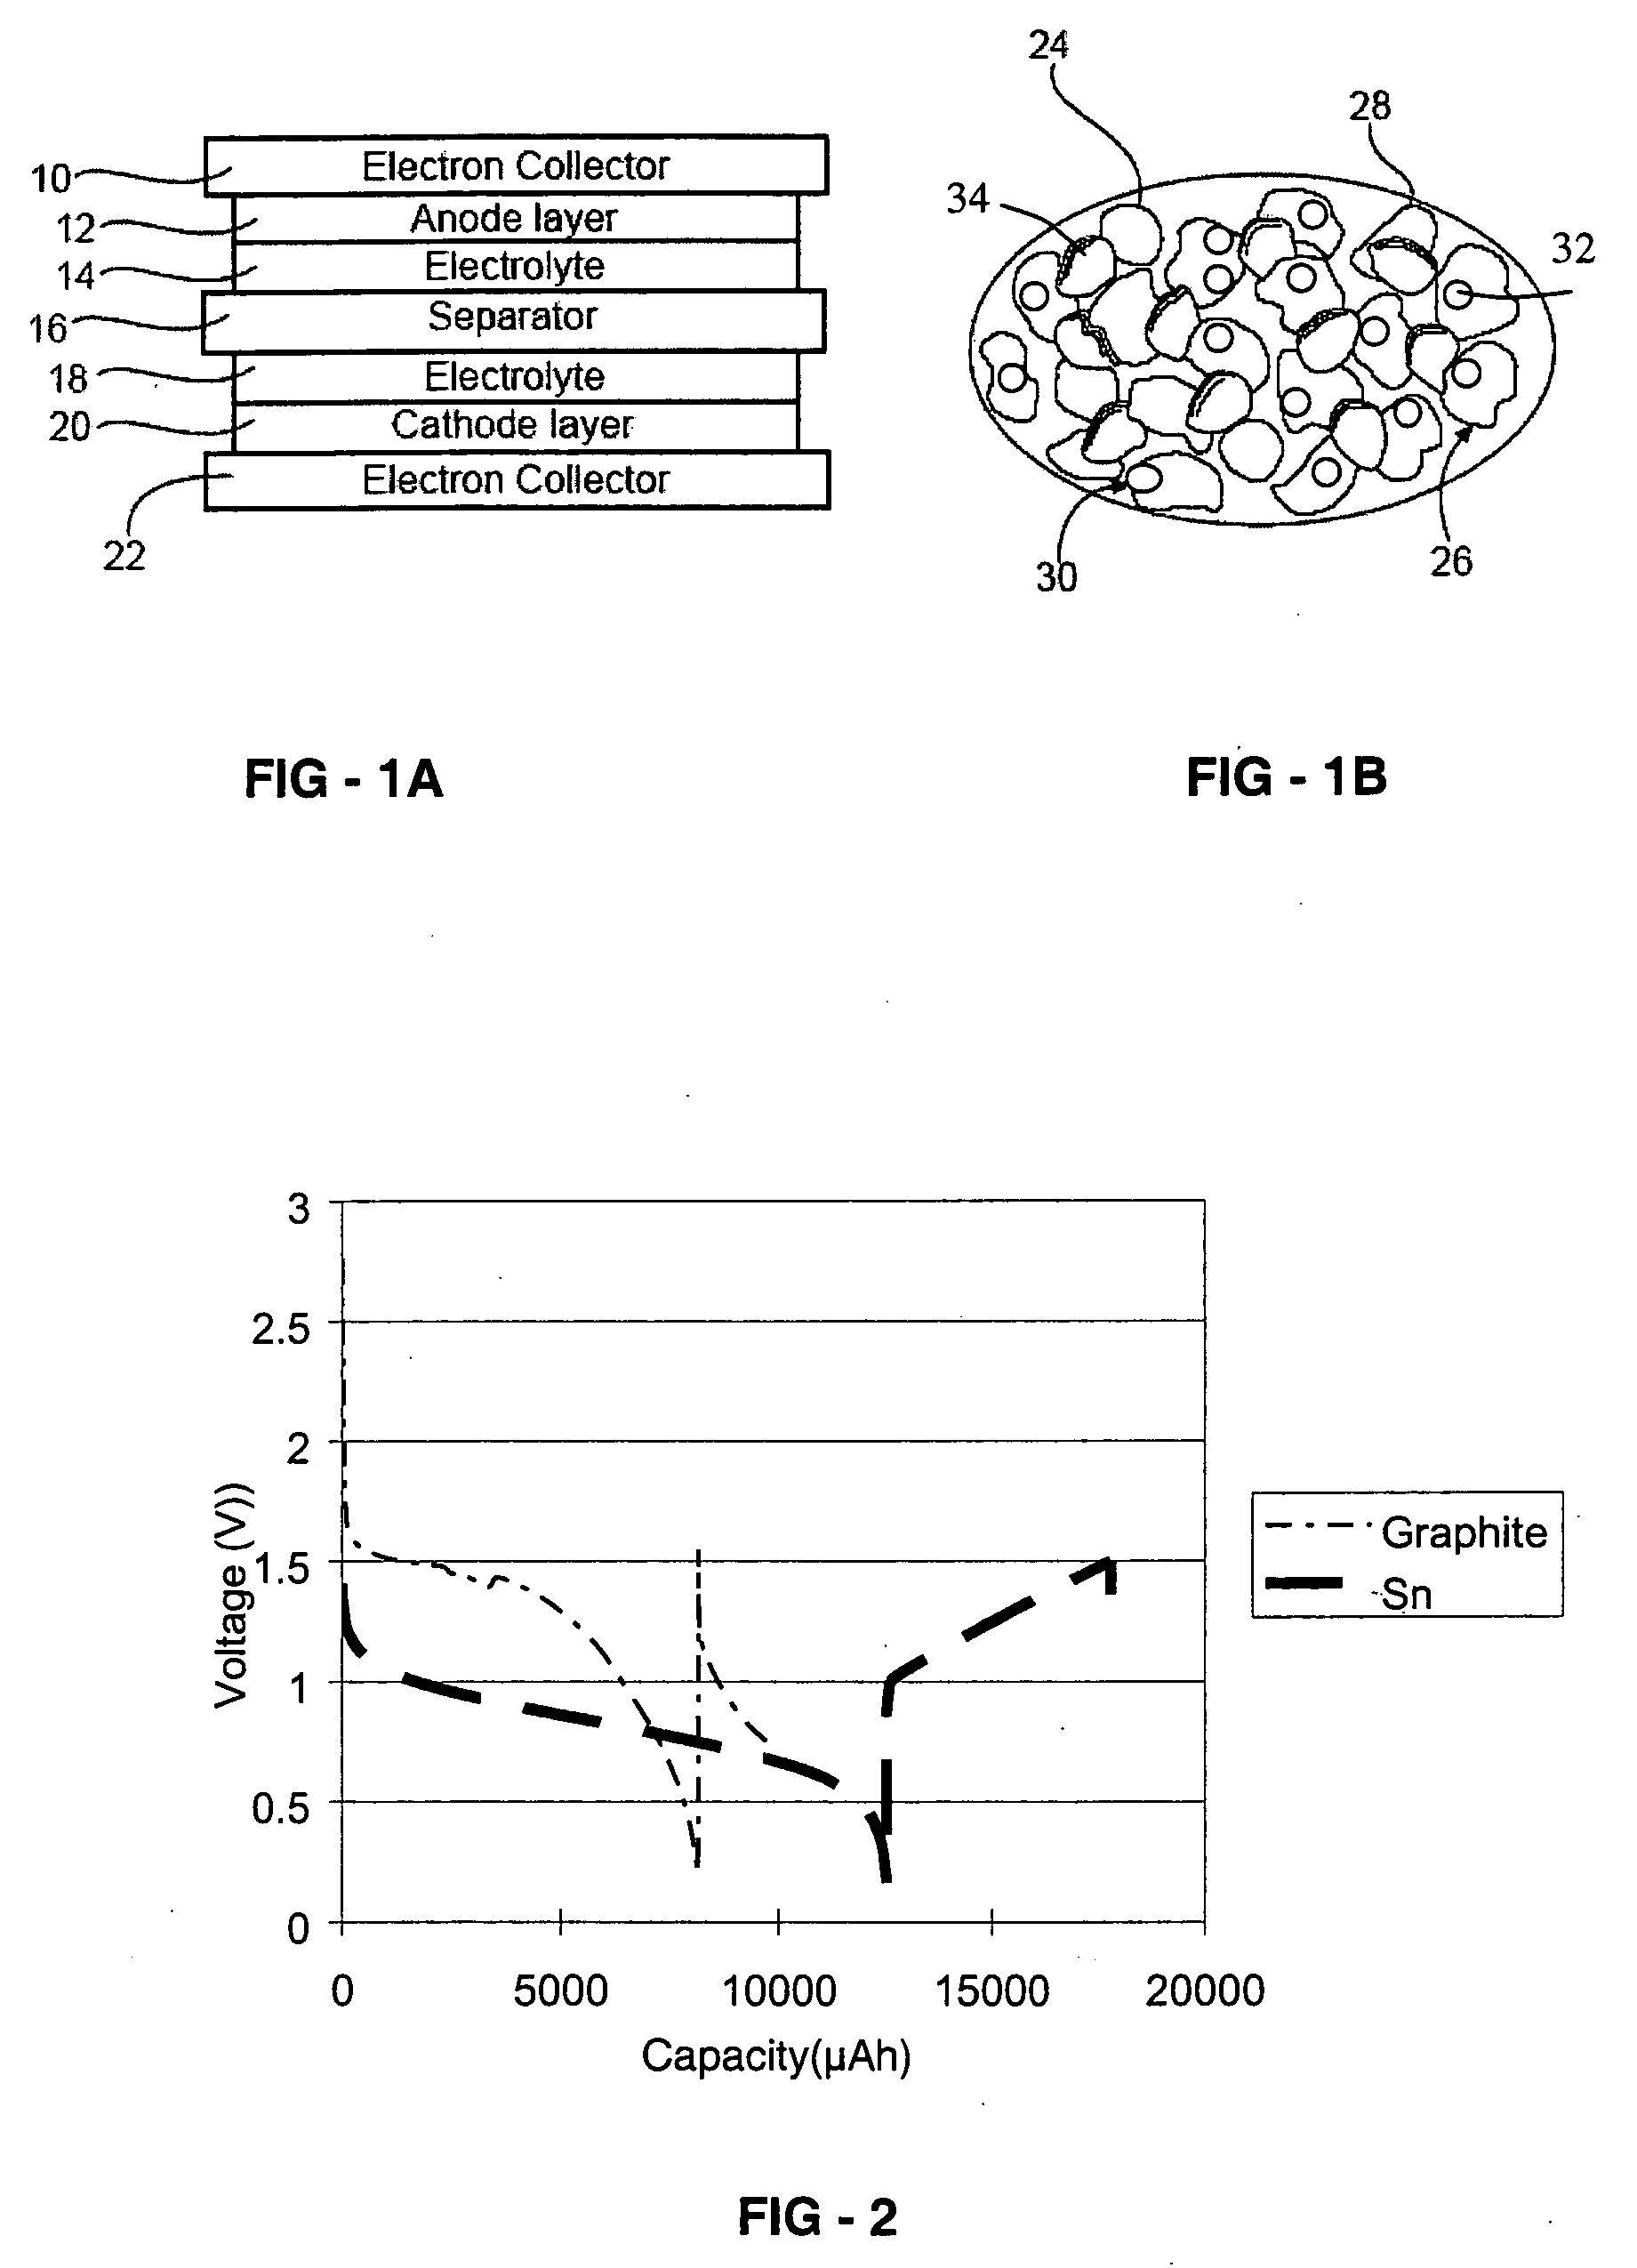 Battery with tin-based negative electrode materials